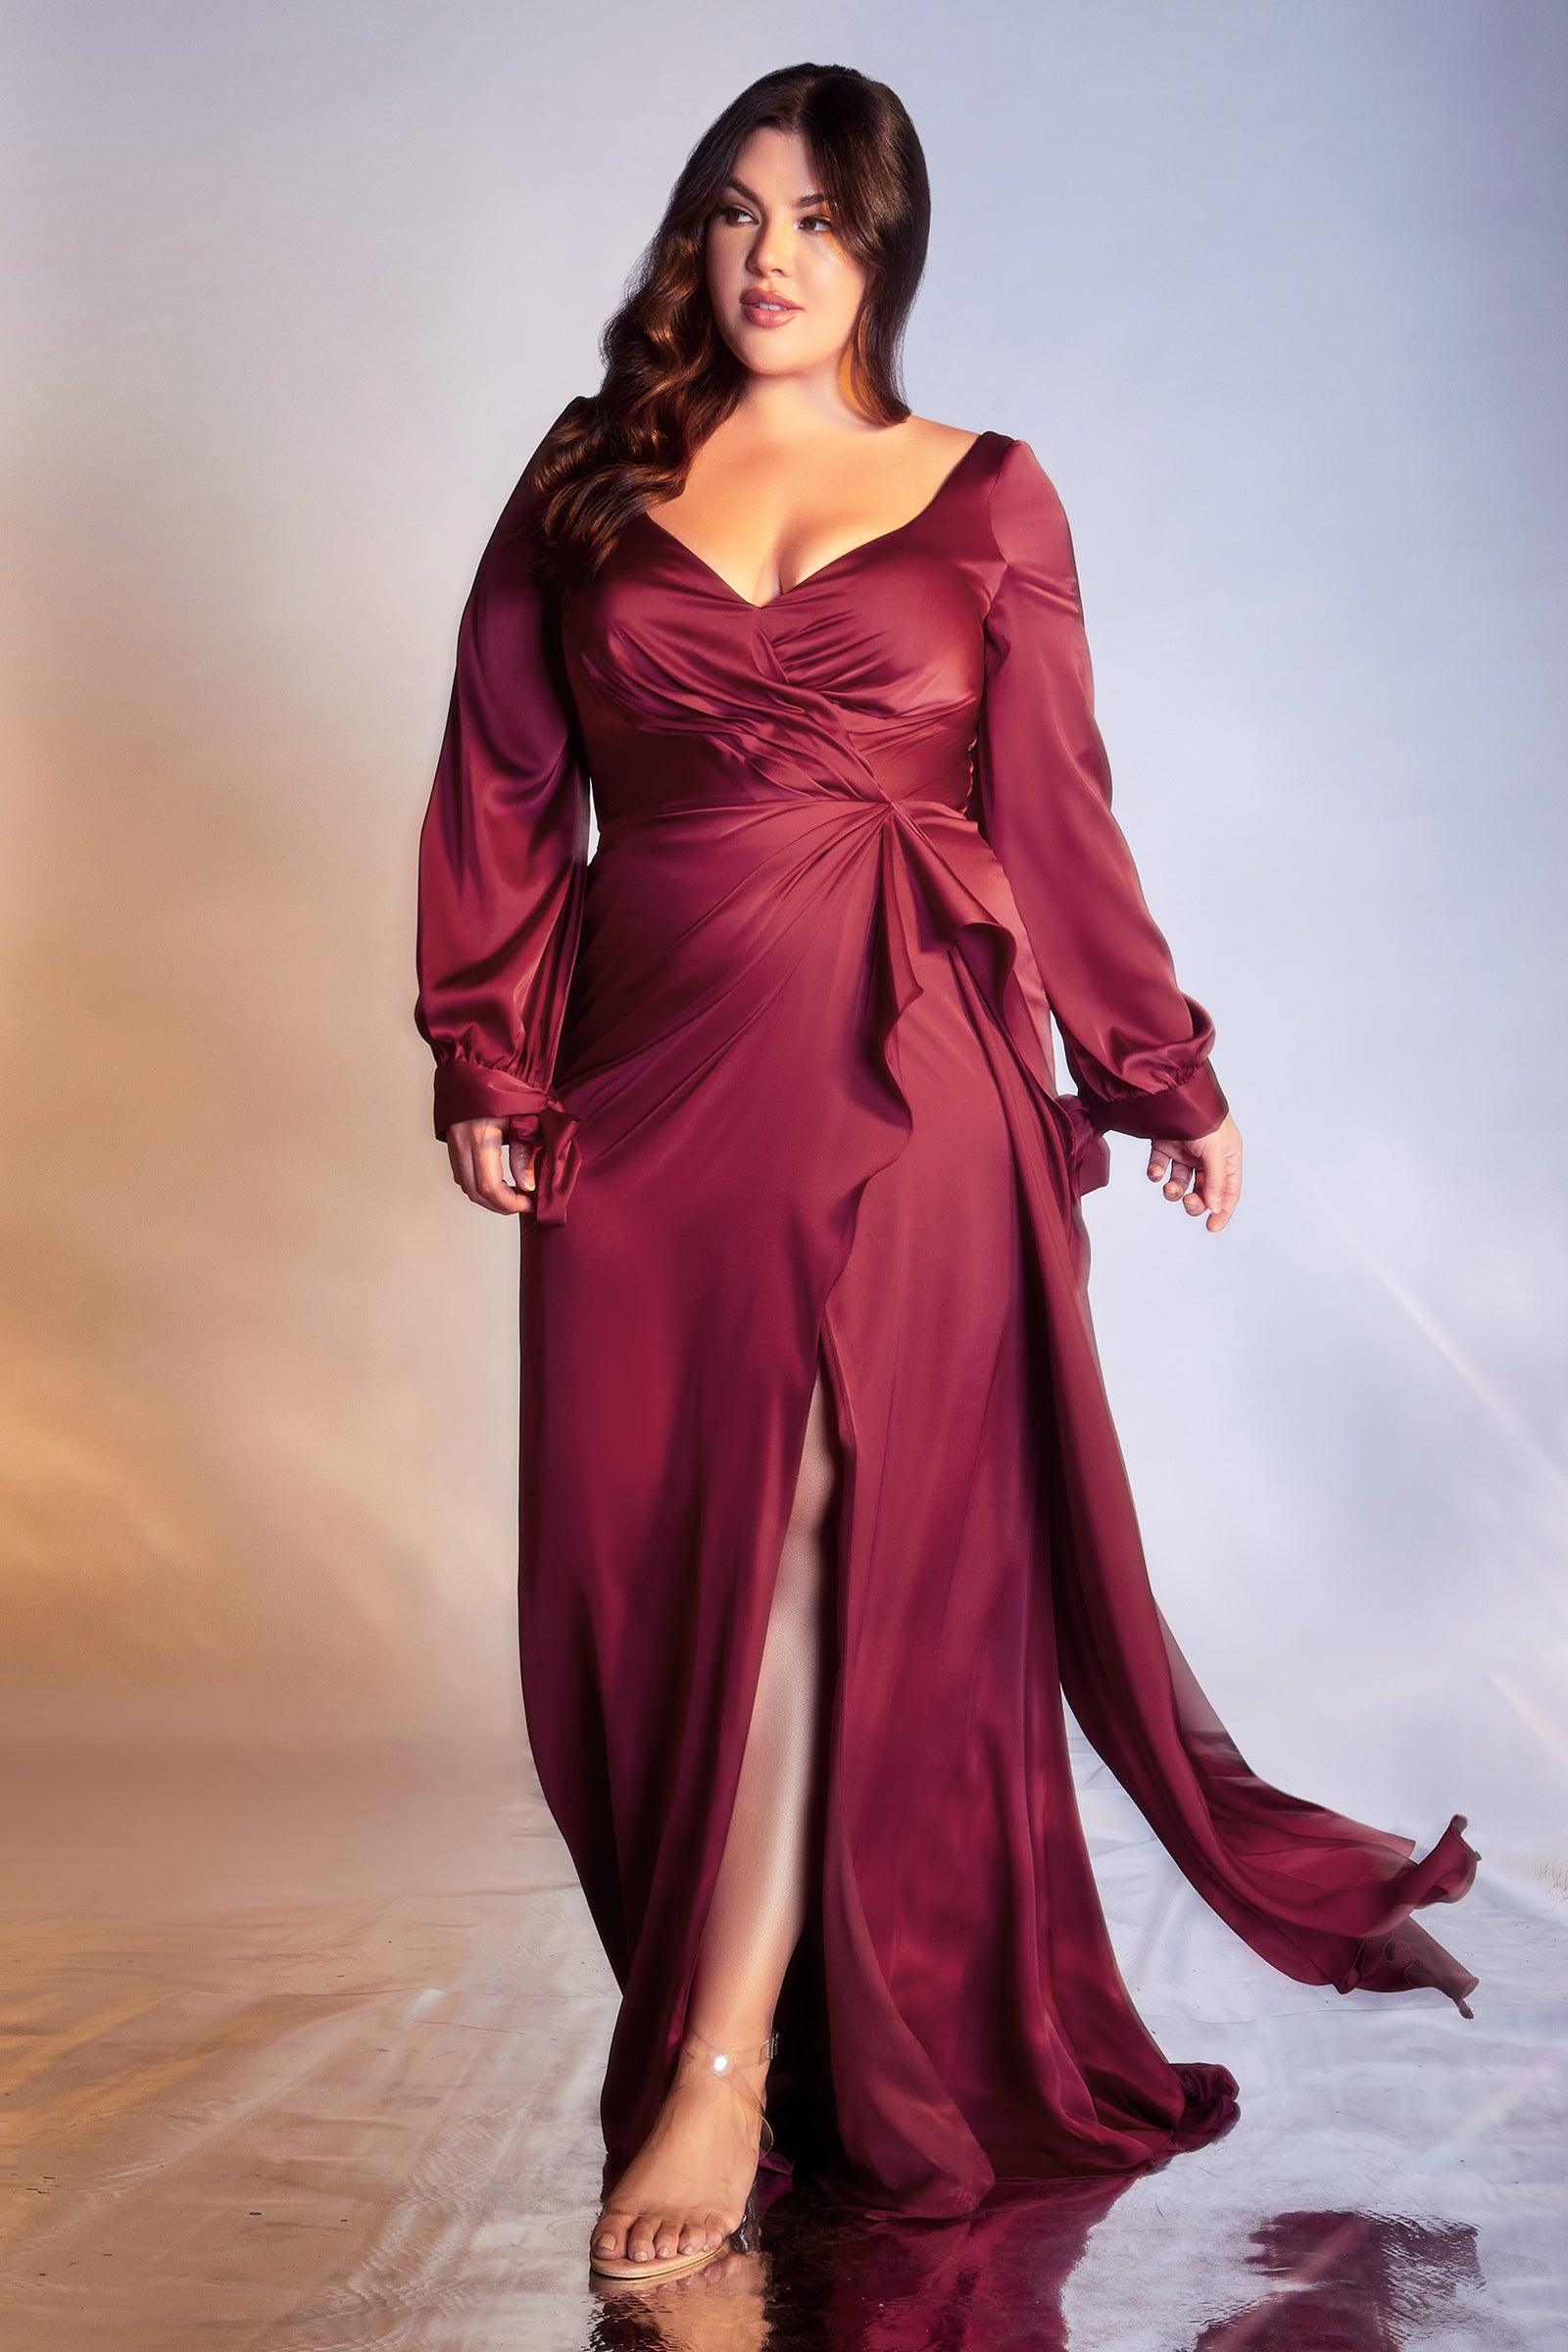 Long Sleeve Plus Size Evening Gown Burgundy